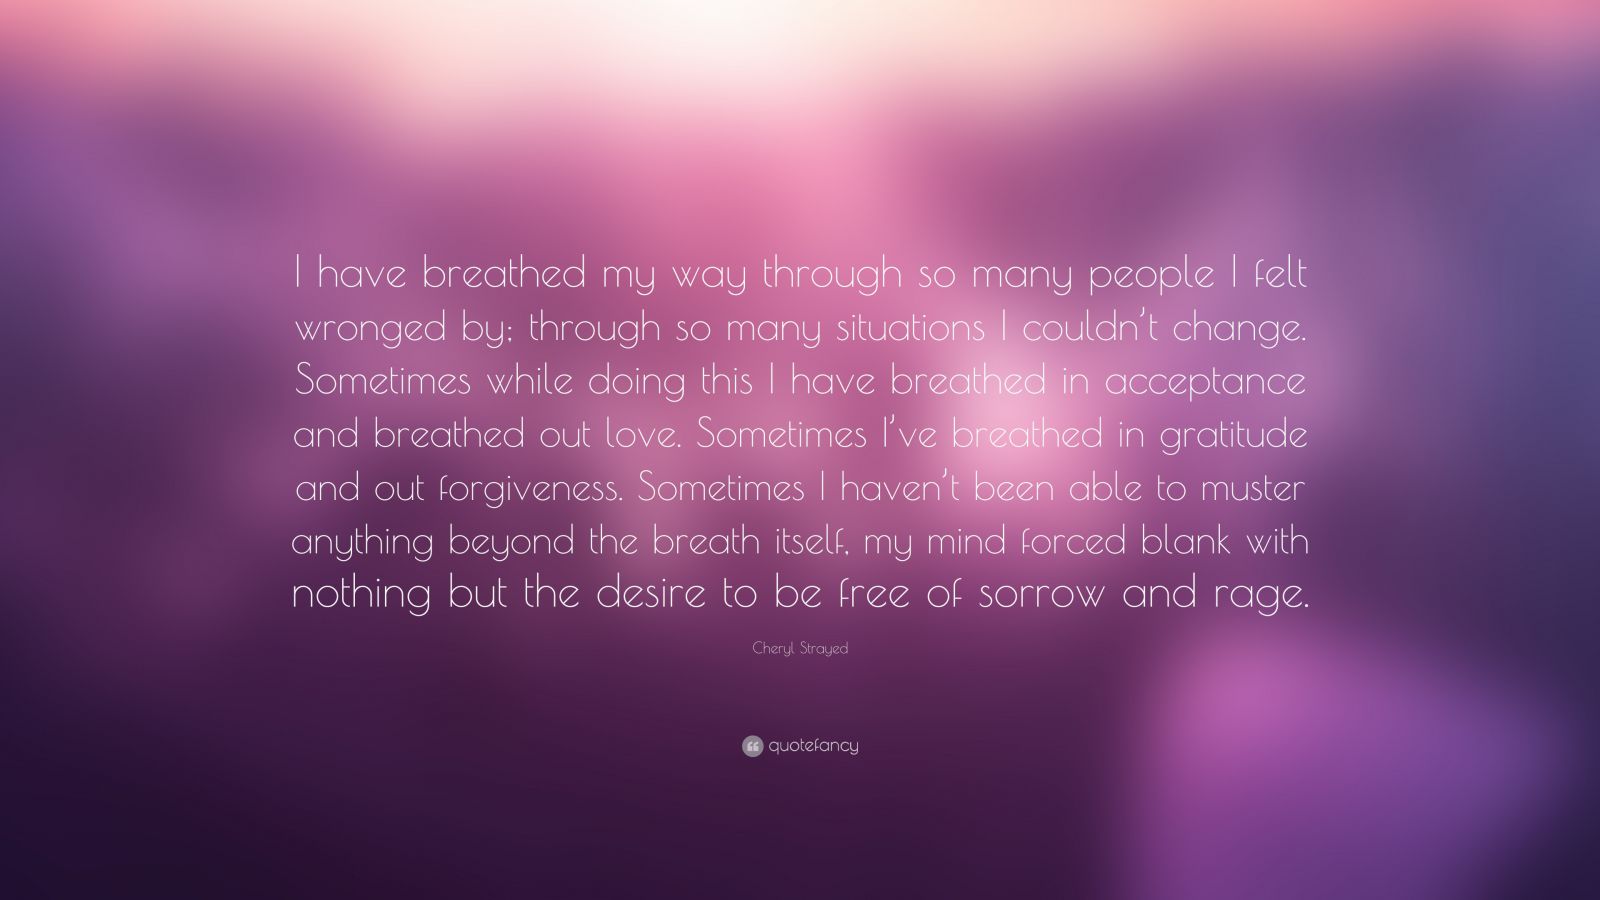 Cheryl Strayed Quote: “I have breathed my way through so many people I ...